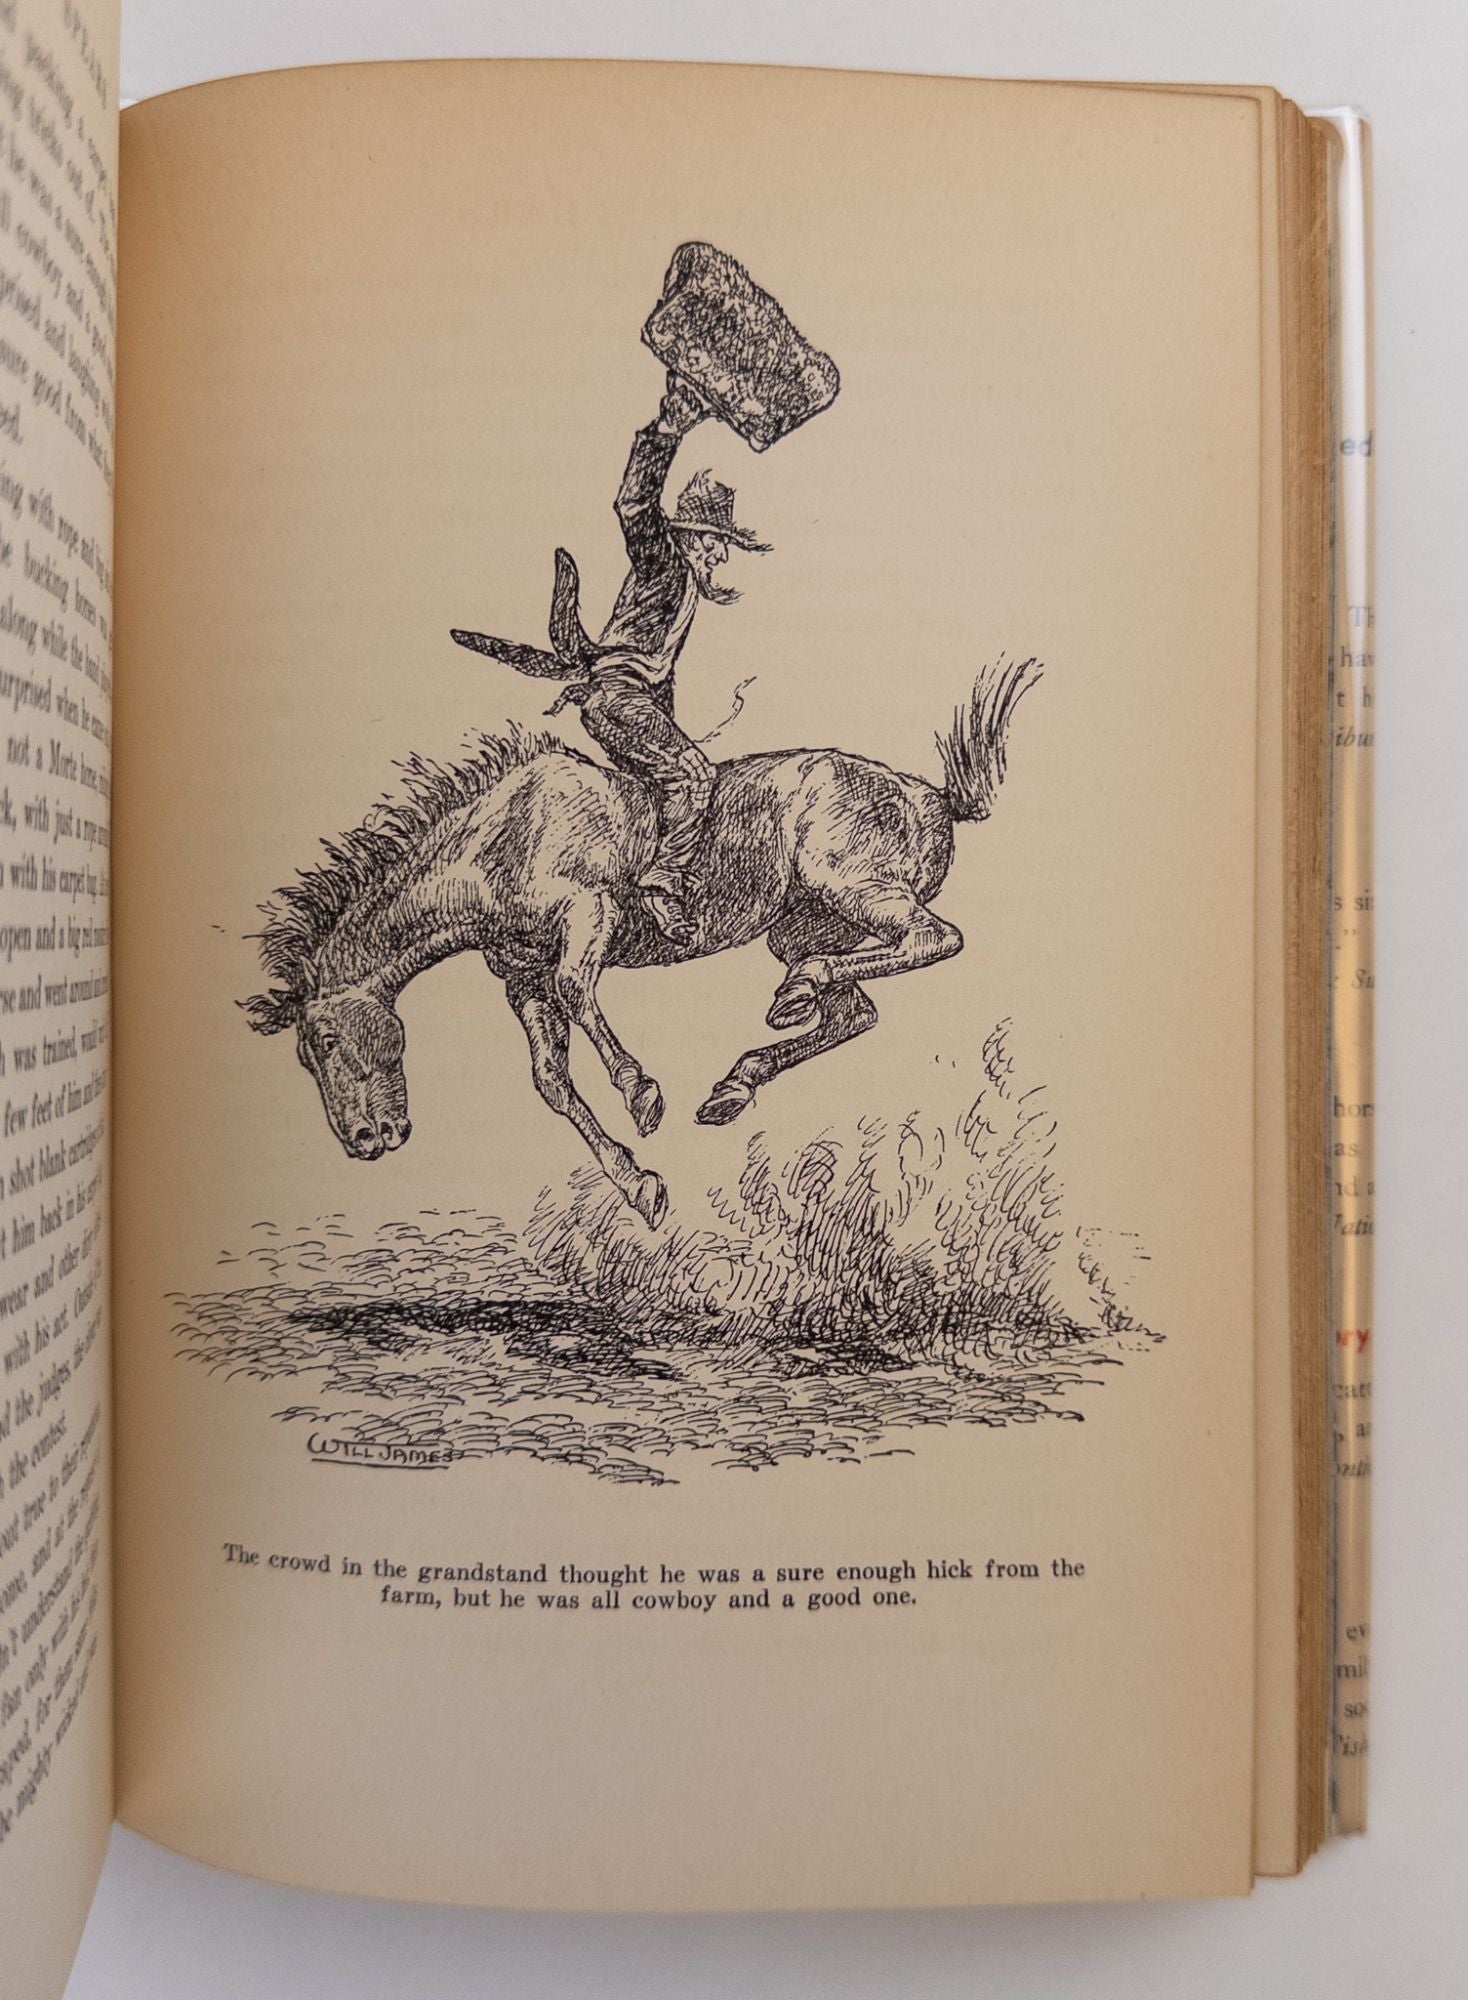 Product Image for FLINT SPEARS - COWBOY RODEO CONTESTANT [Signed by both James and Doubleday]